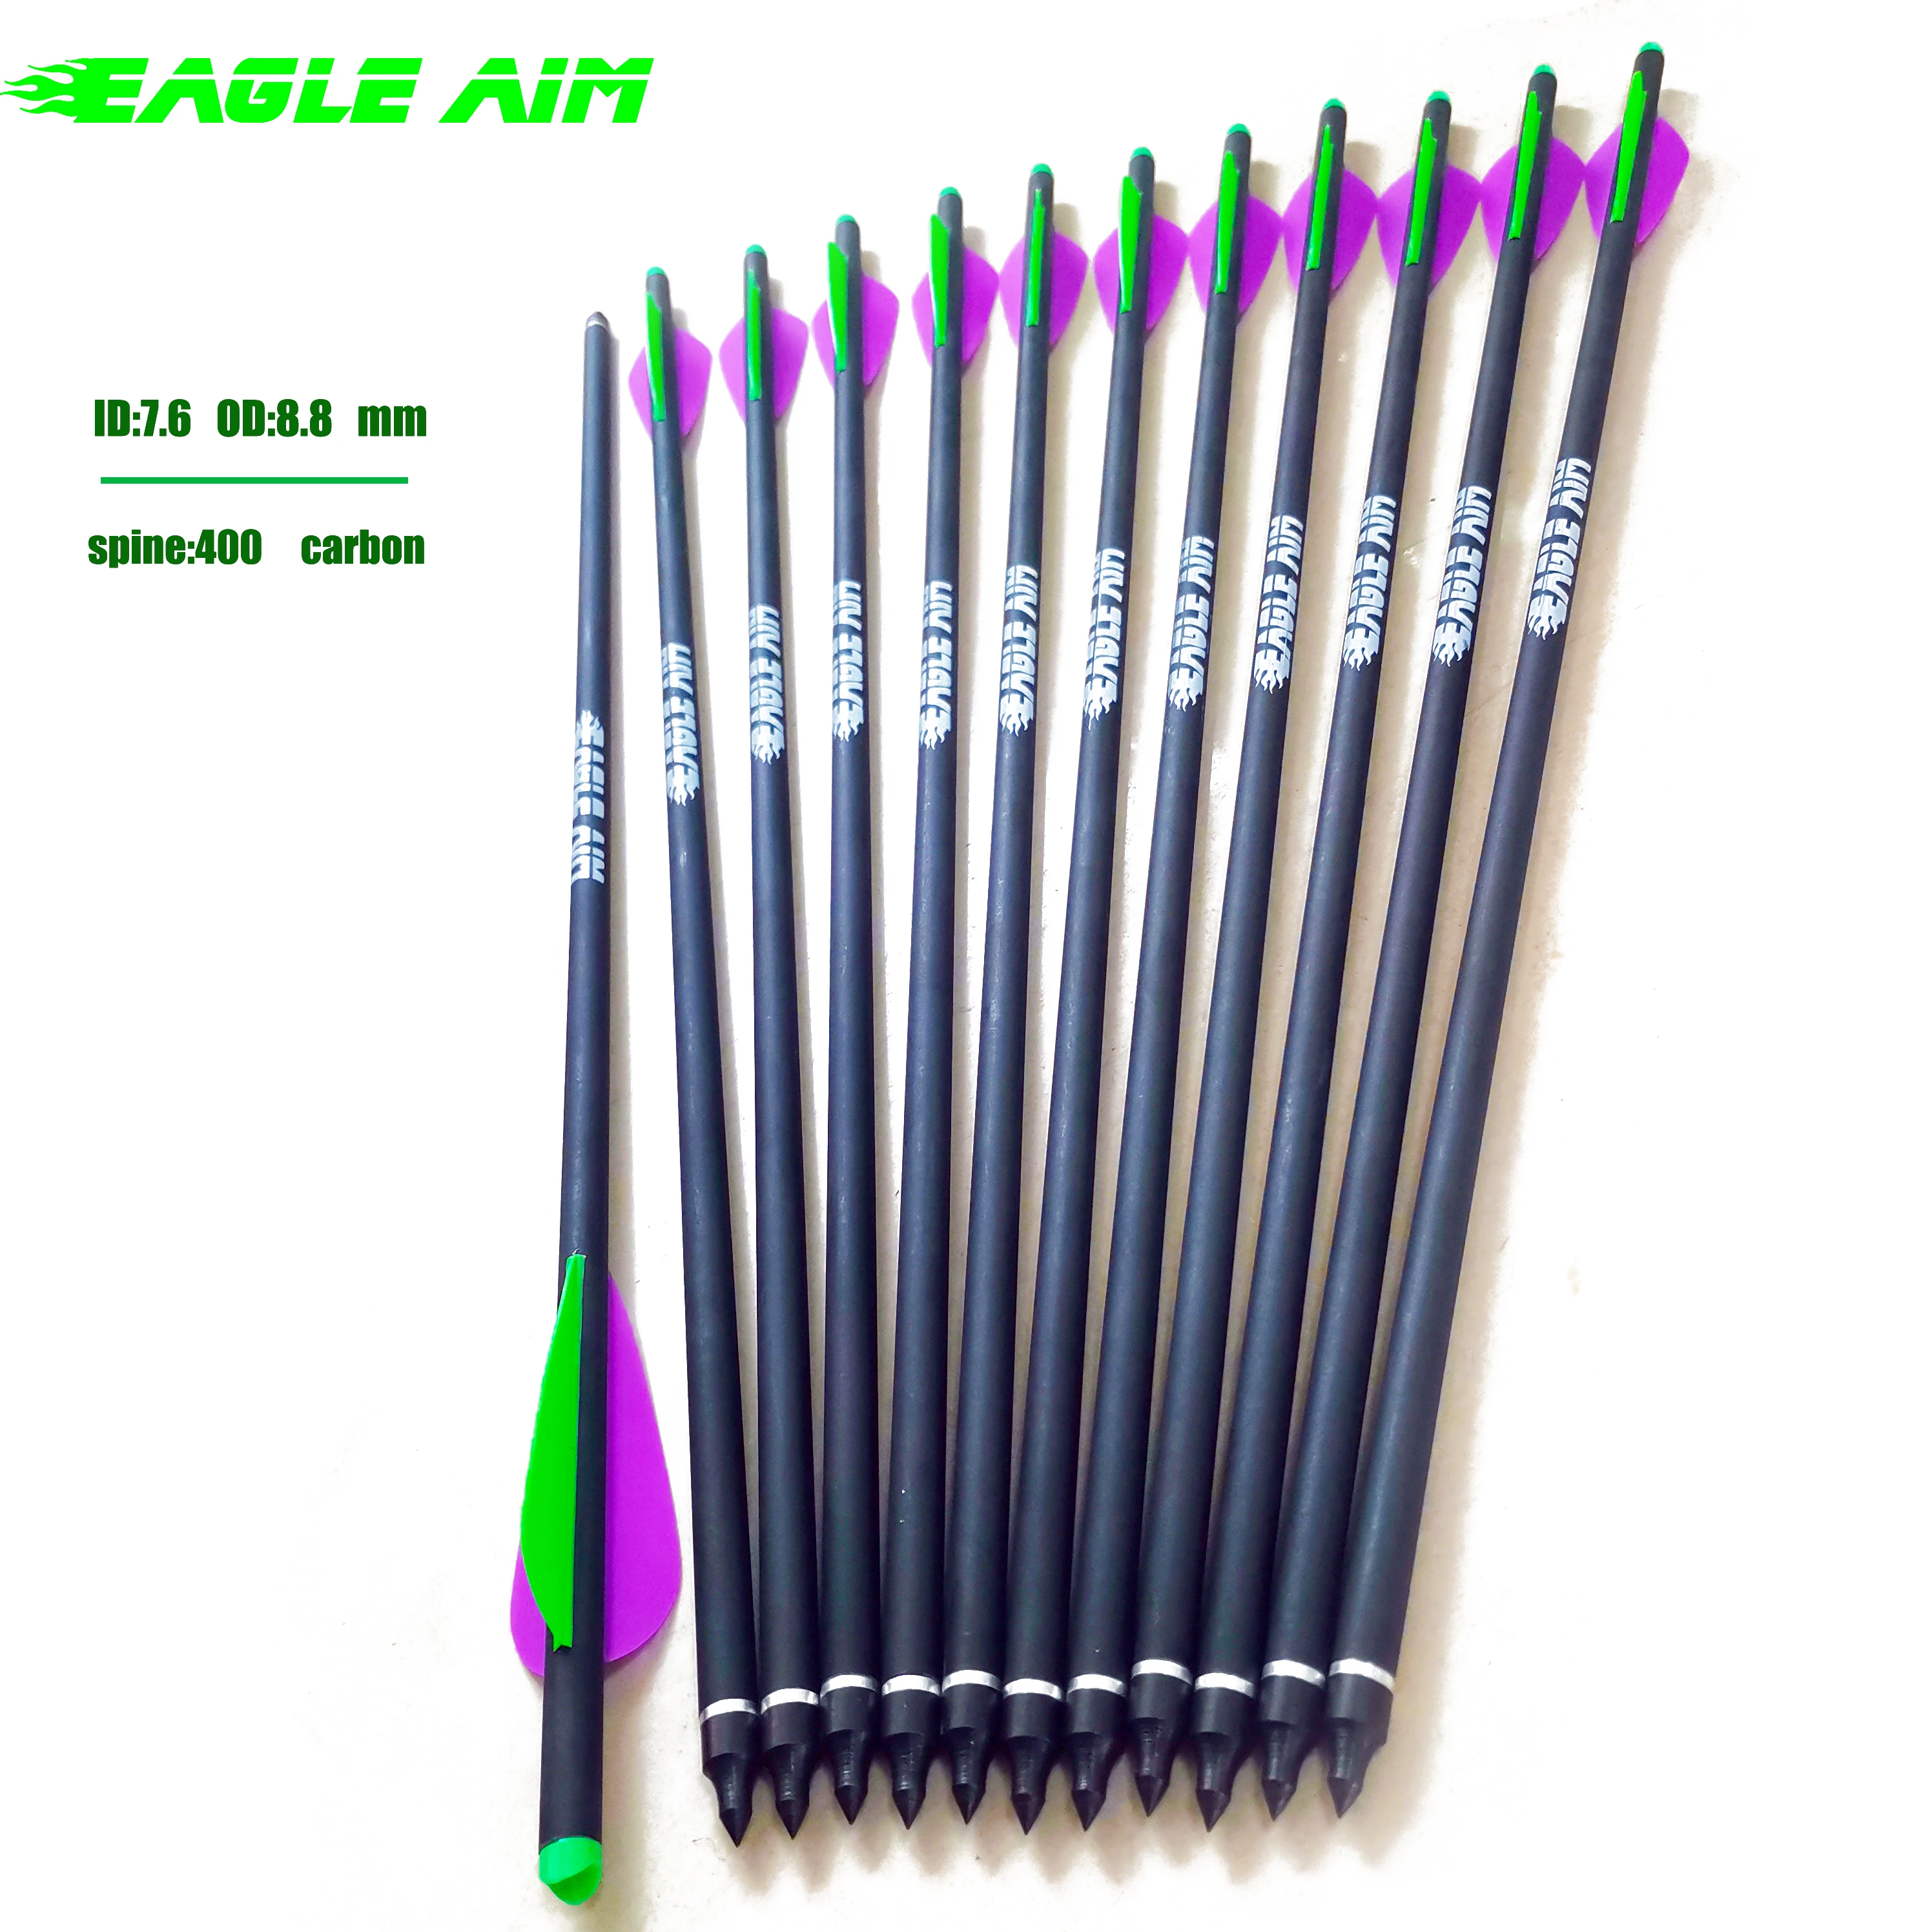 

12Pcs 16/17/18/20/22 inches Carbon Arrow OD 8.8mm Crossbow Bolts with 3 Inch Vane for Archery Hunting